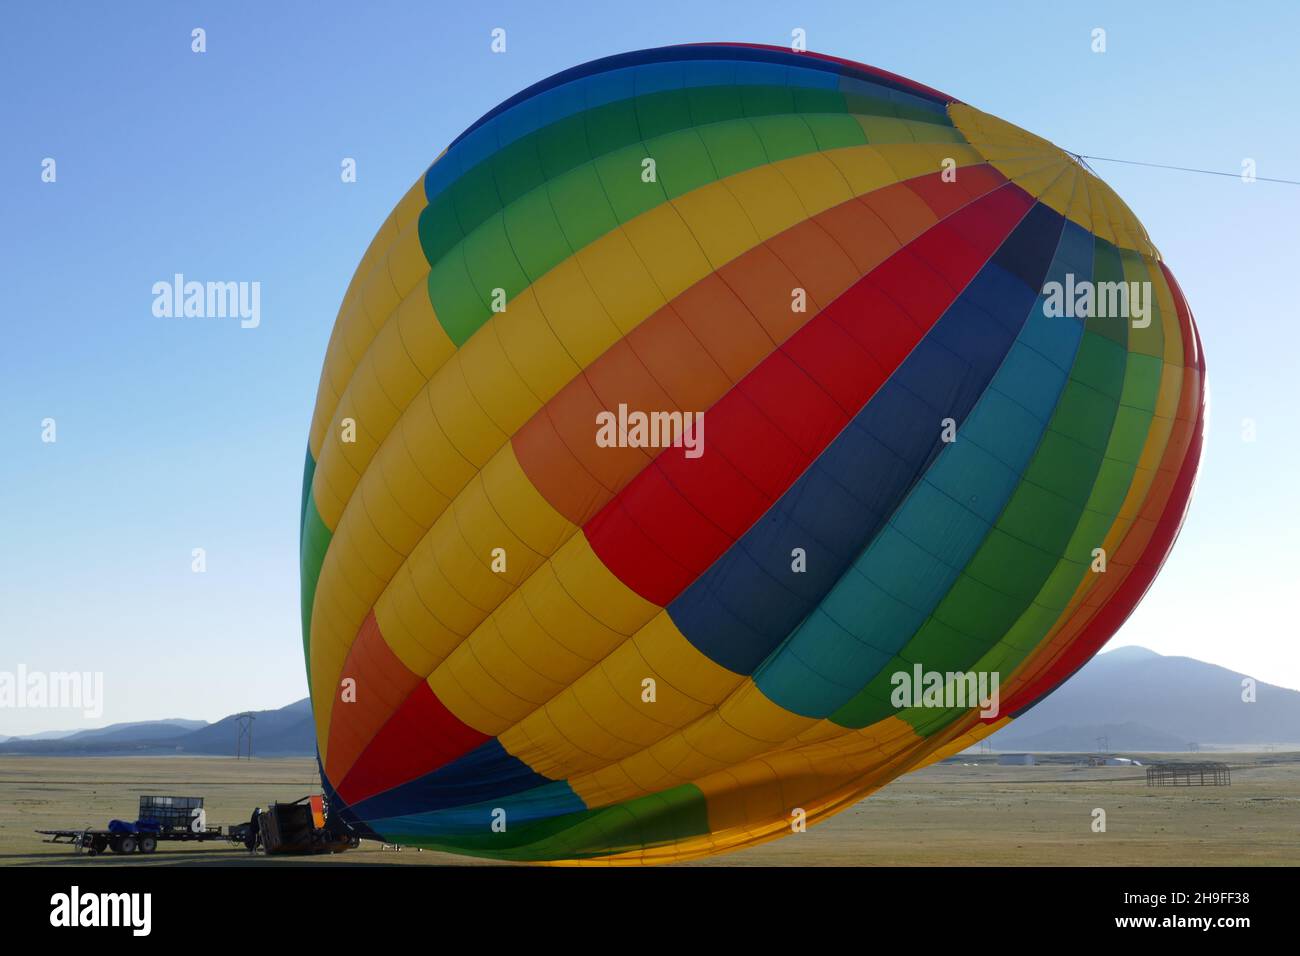 Colorful hot air balloon and equipment after landing Stock Photo